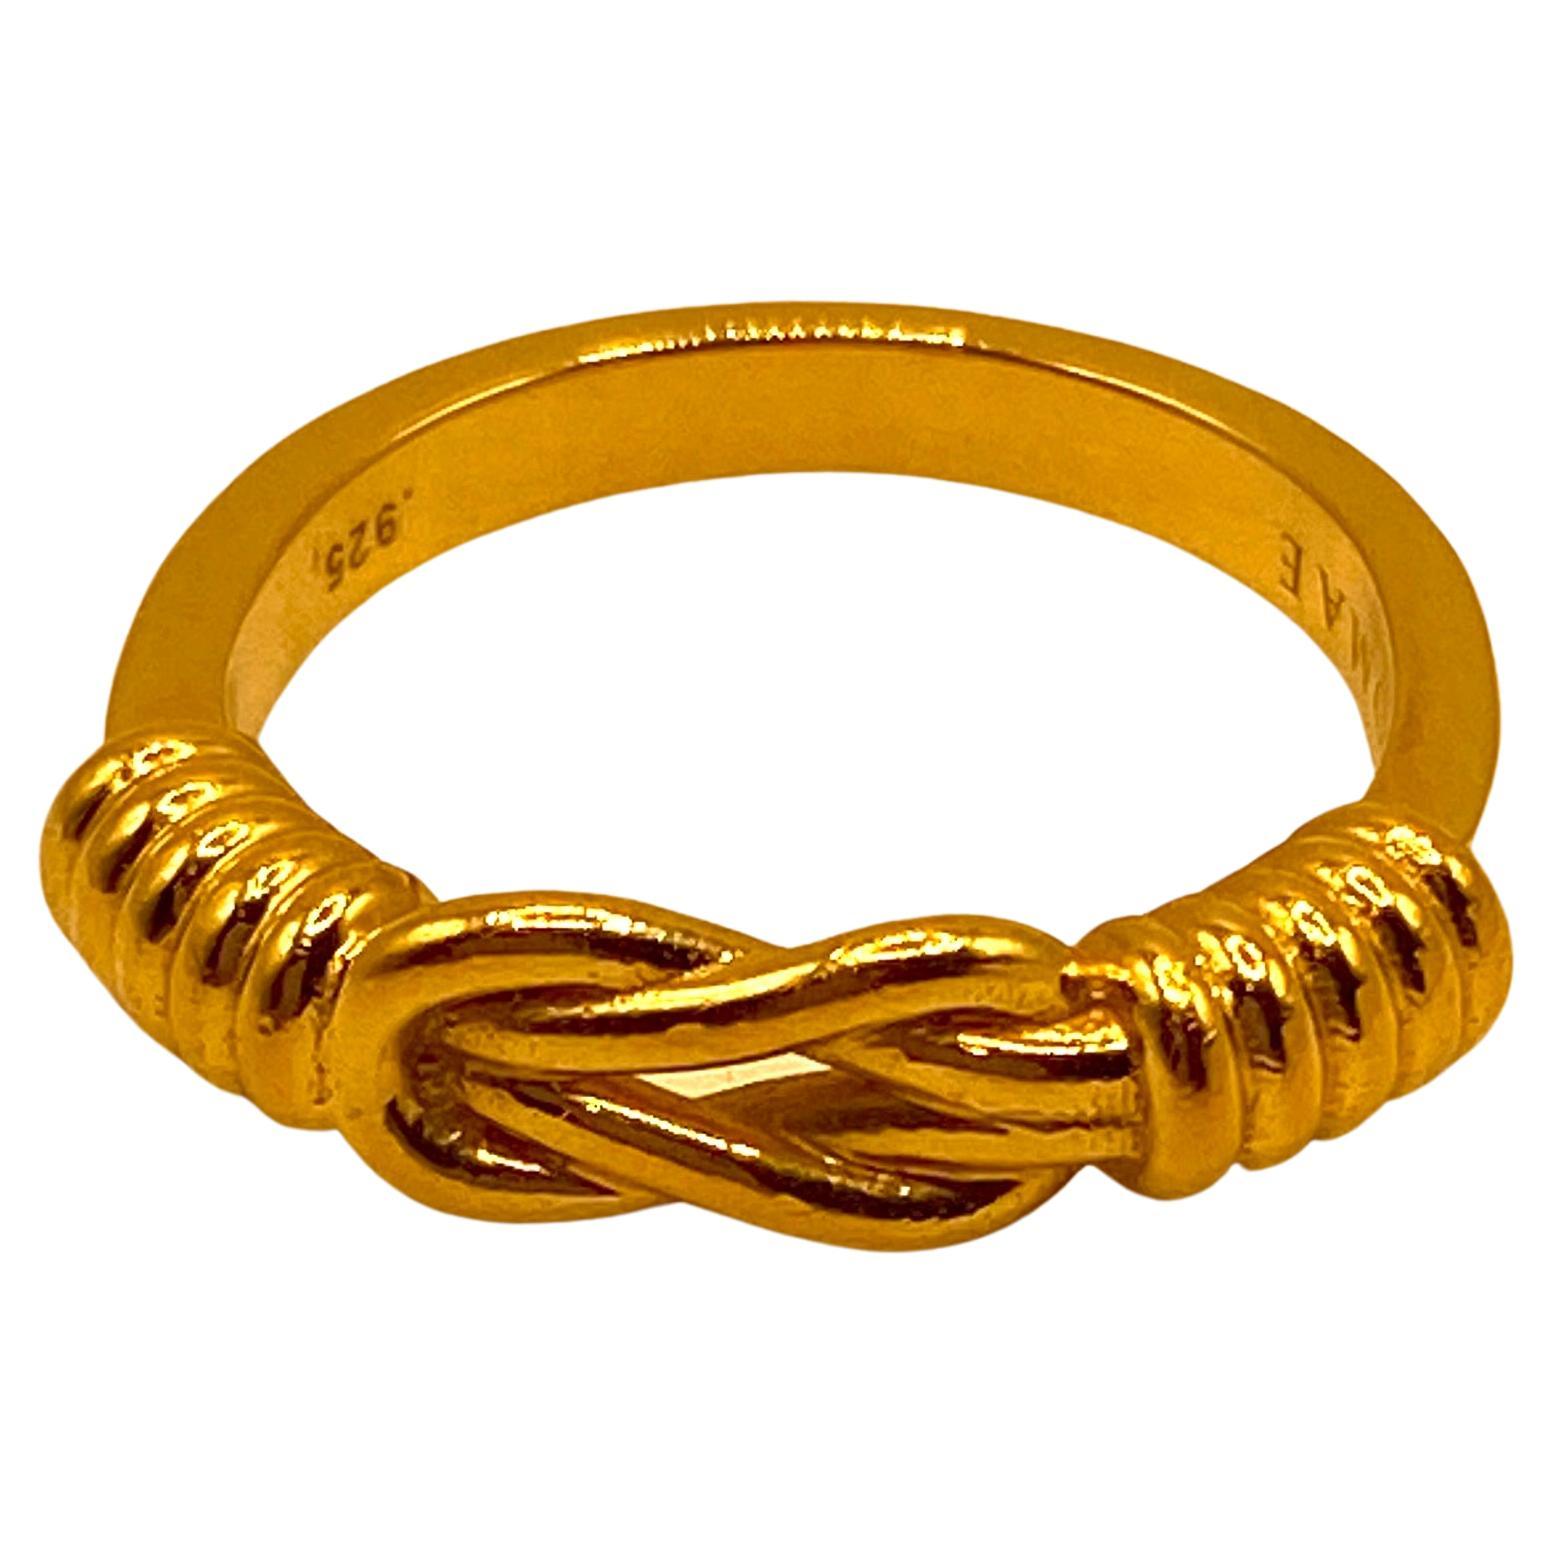 22 Karat Gold Hercules Knot Ring by Romae Jewelry - Inspired by Ancient Designs